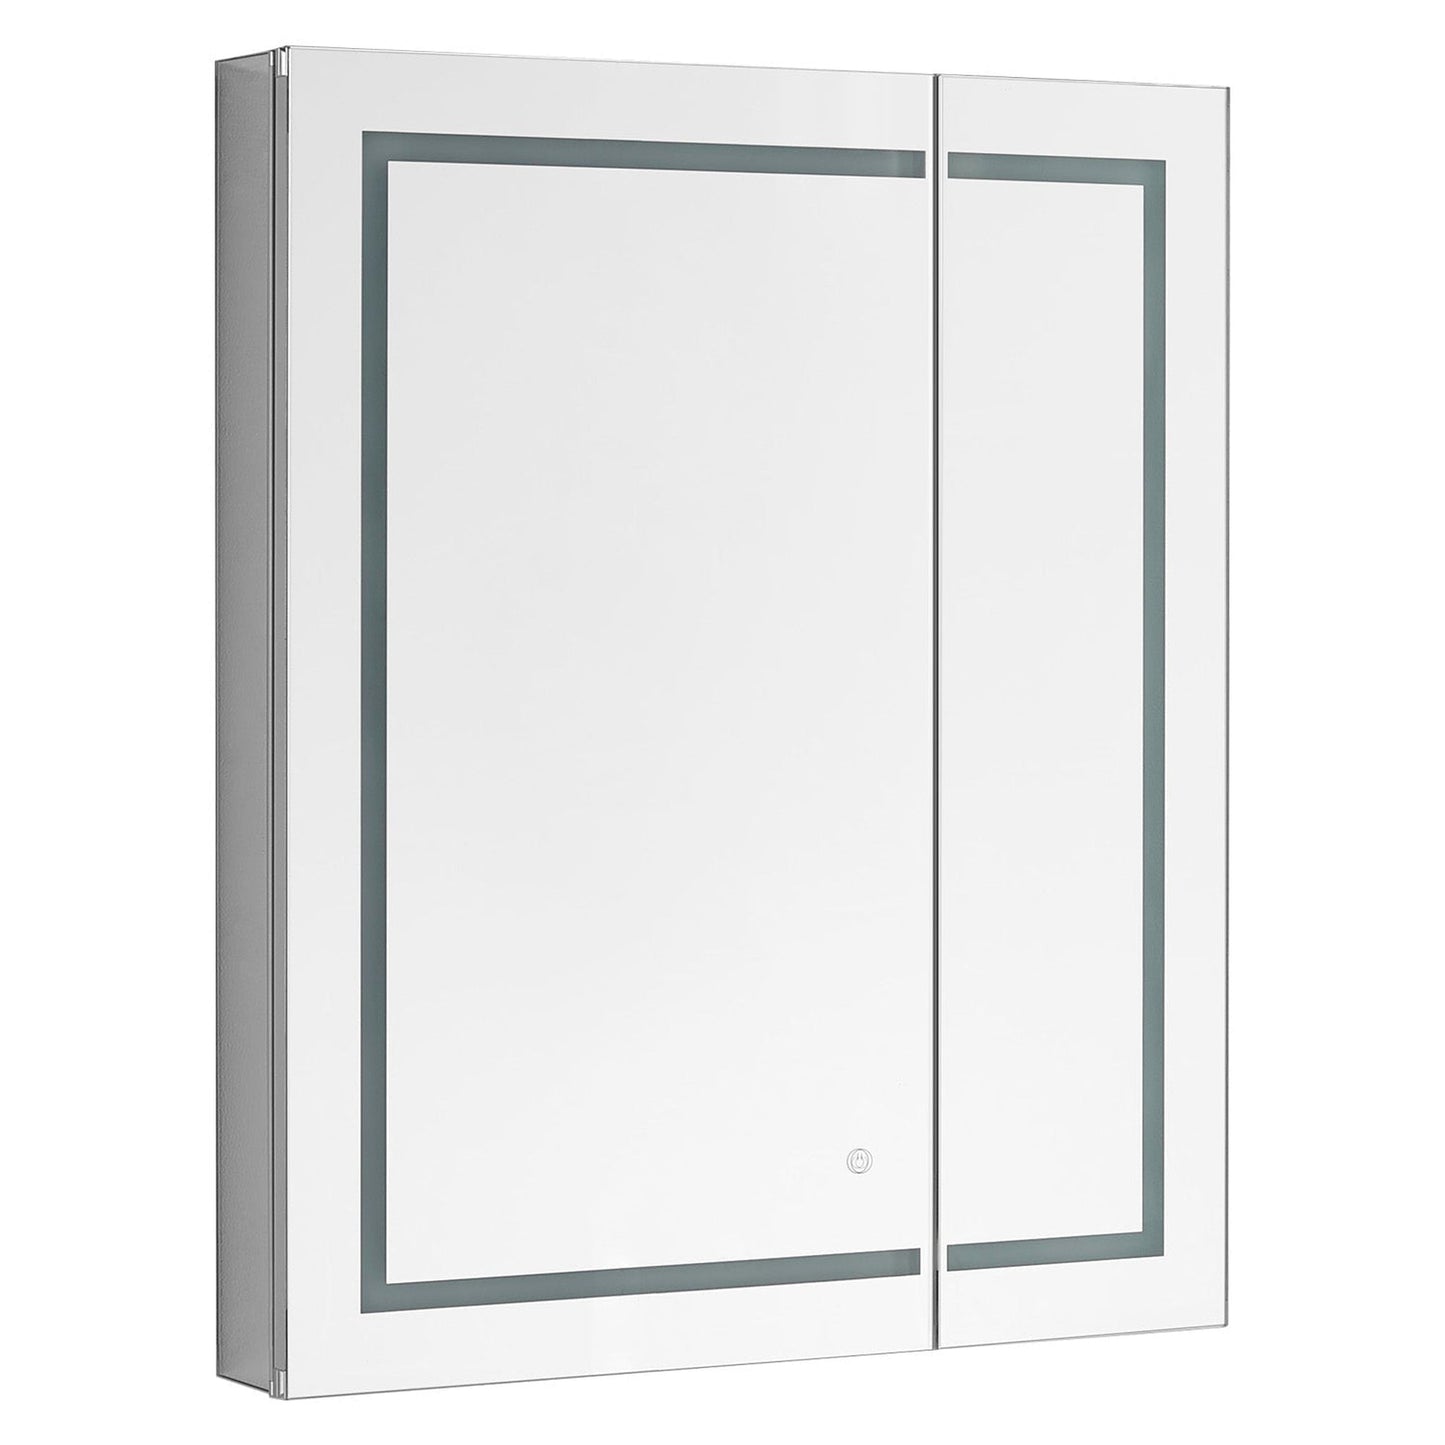 Aquadom Royale Plus 36" x 30" Rectangle Recessed or Surface Mount Bi-View LED Lighted Bathroom Medicine Cabinet With Defogger, Electrical Outlet, Magnifying Mirror